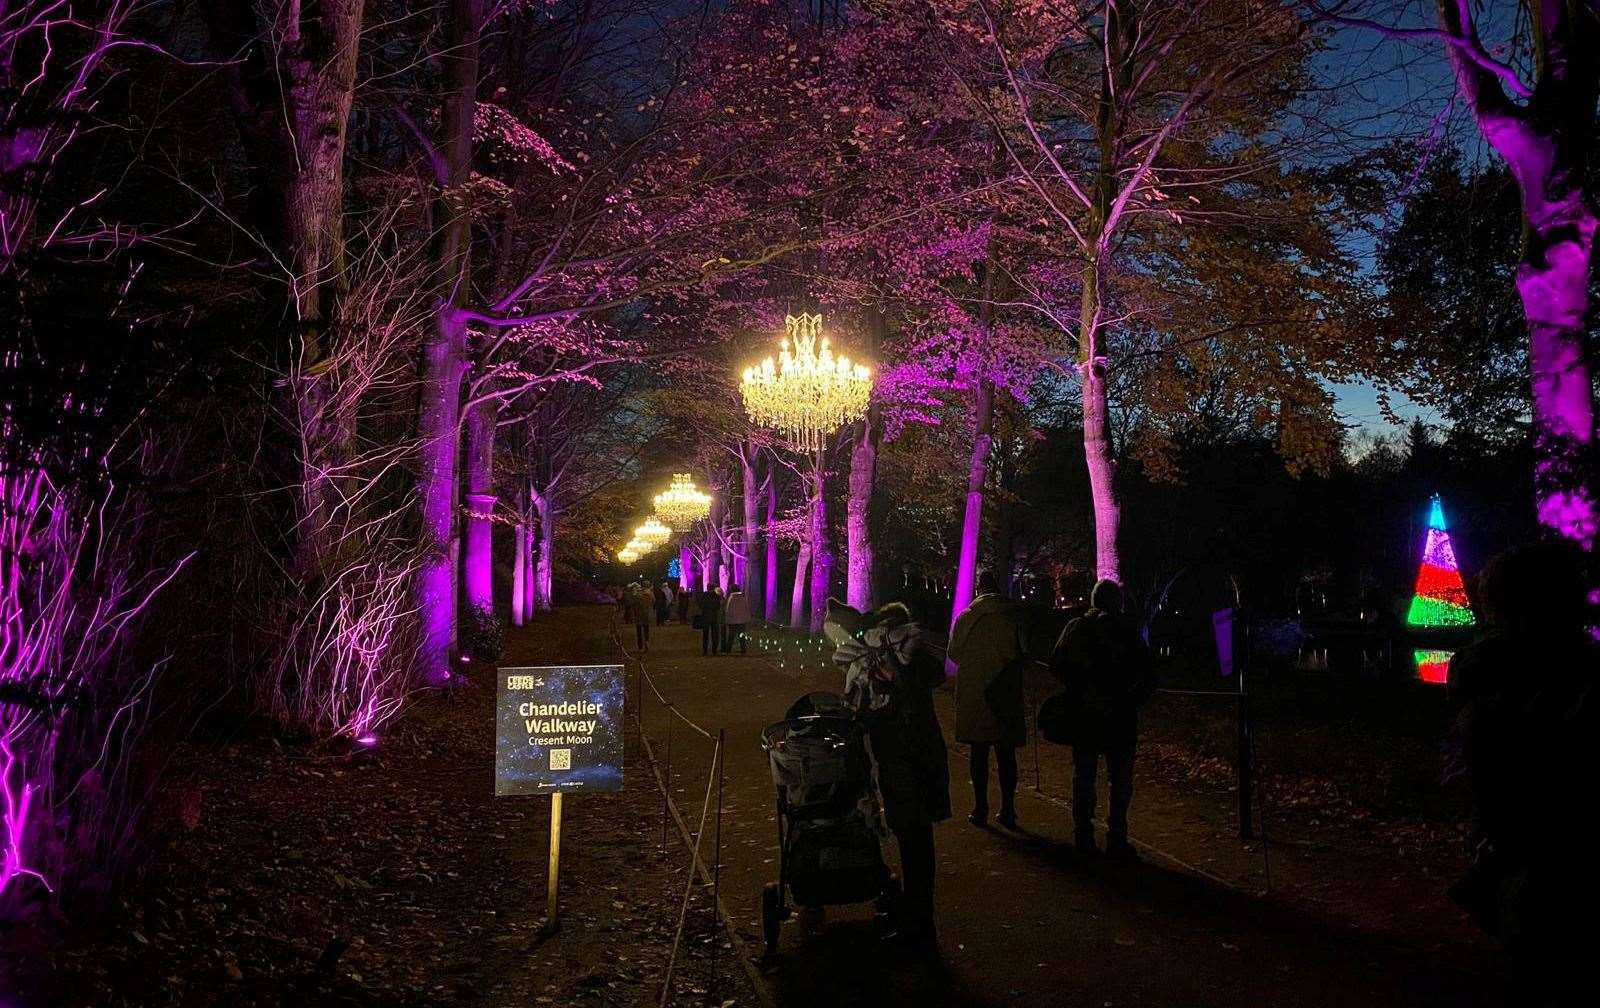 The trail began with the new Chandelier Walk with light fixtures hanging from the trees